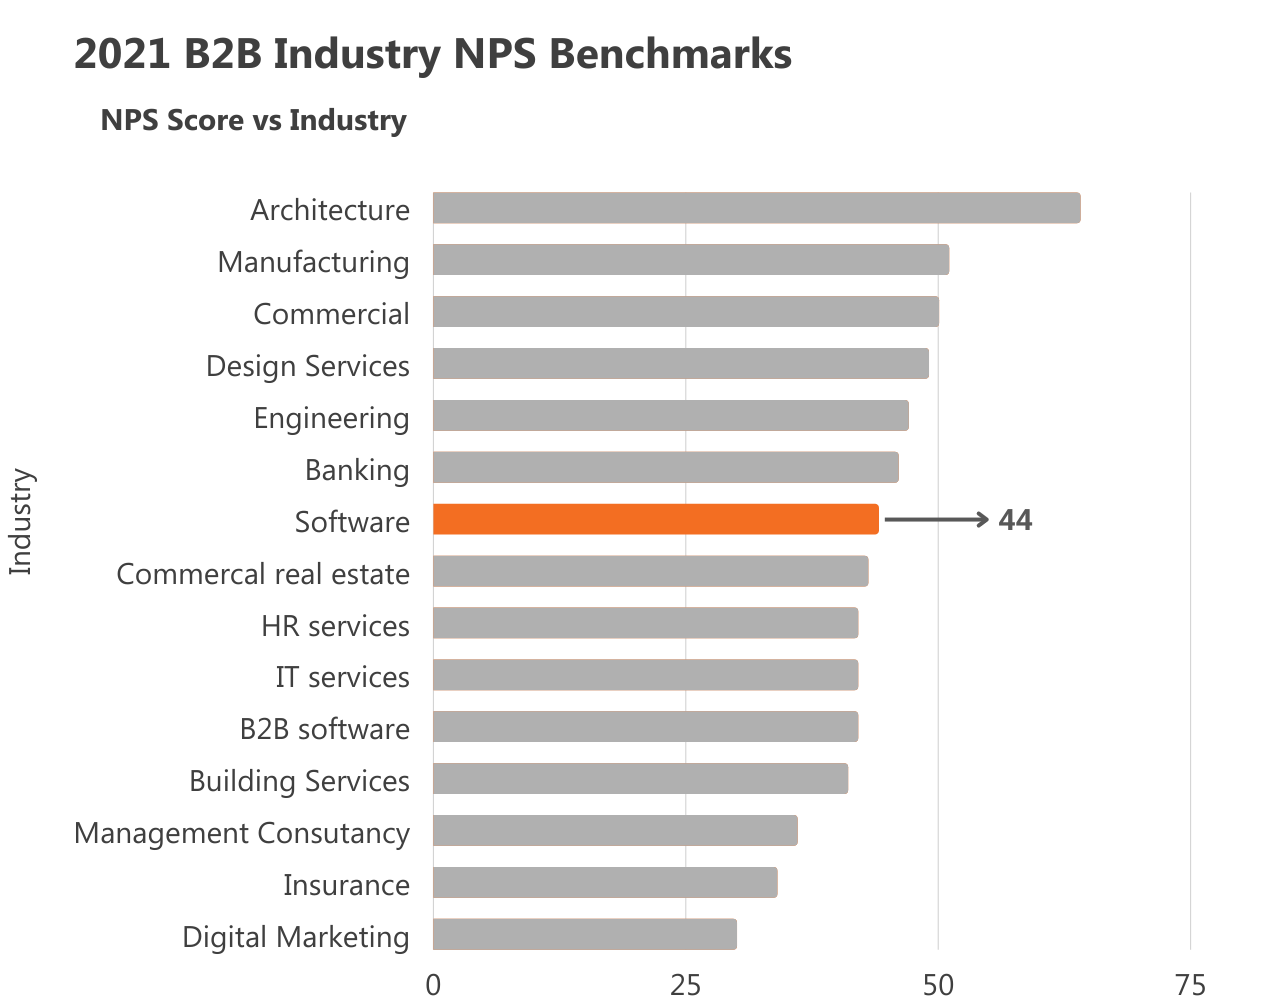 Average NPS of software companies